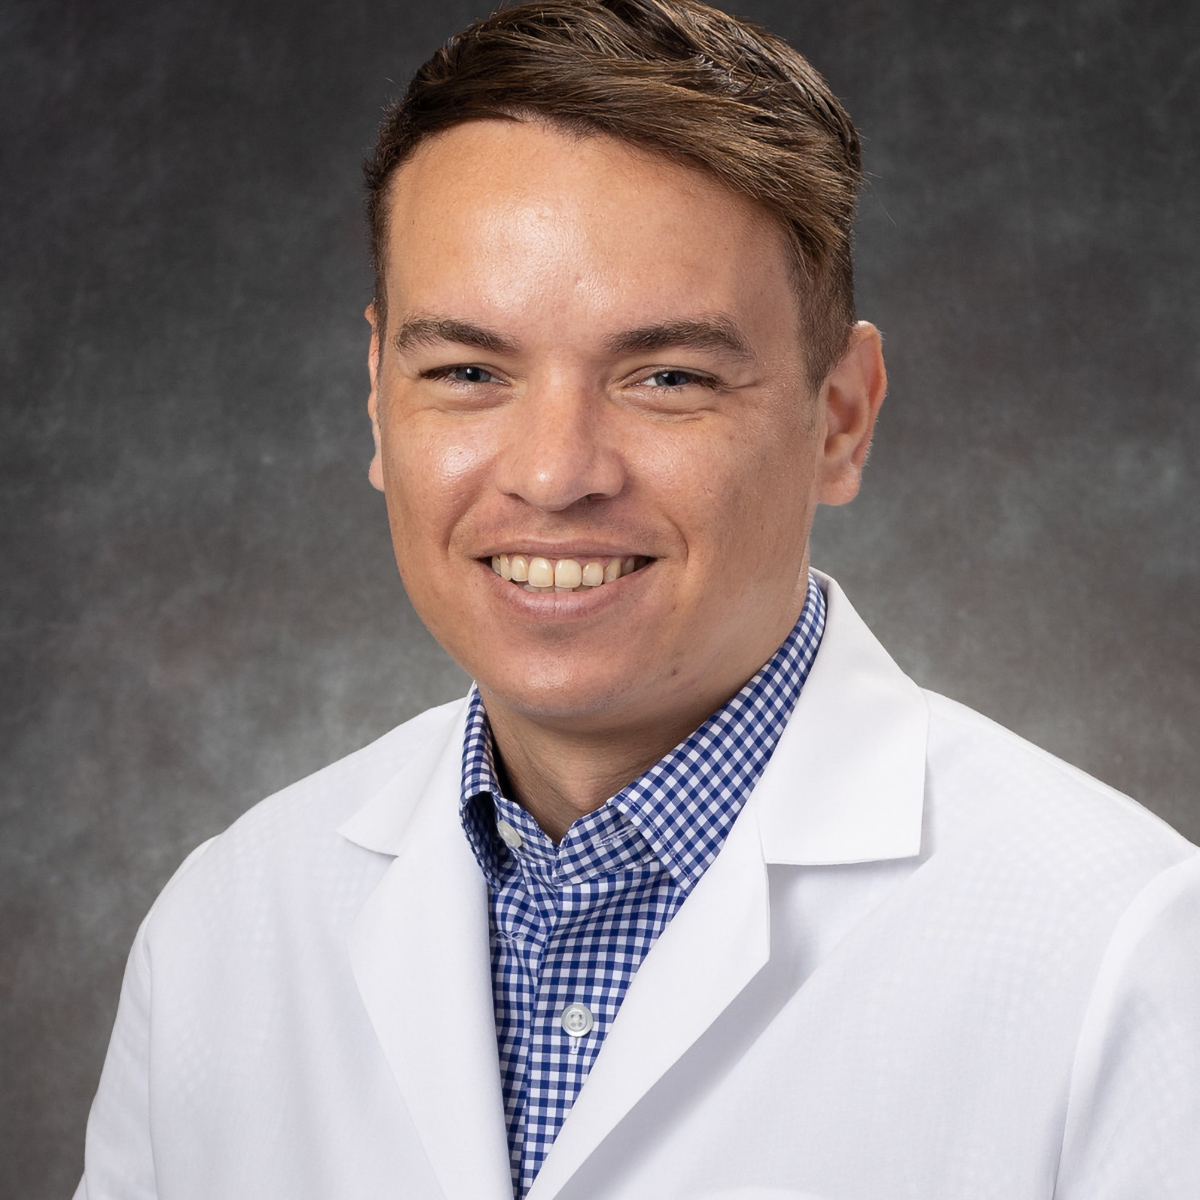 A friendly headshot of Hector Flores-Bermudez, MD